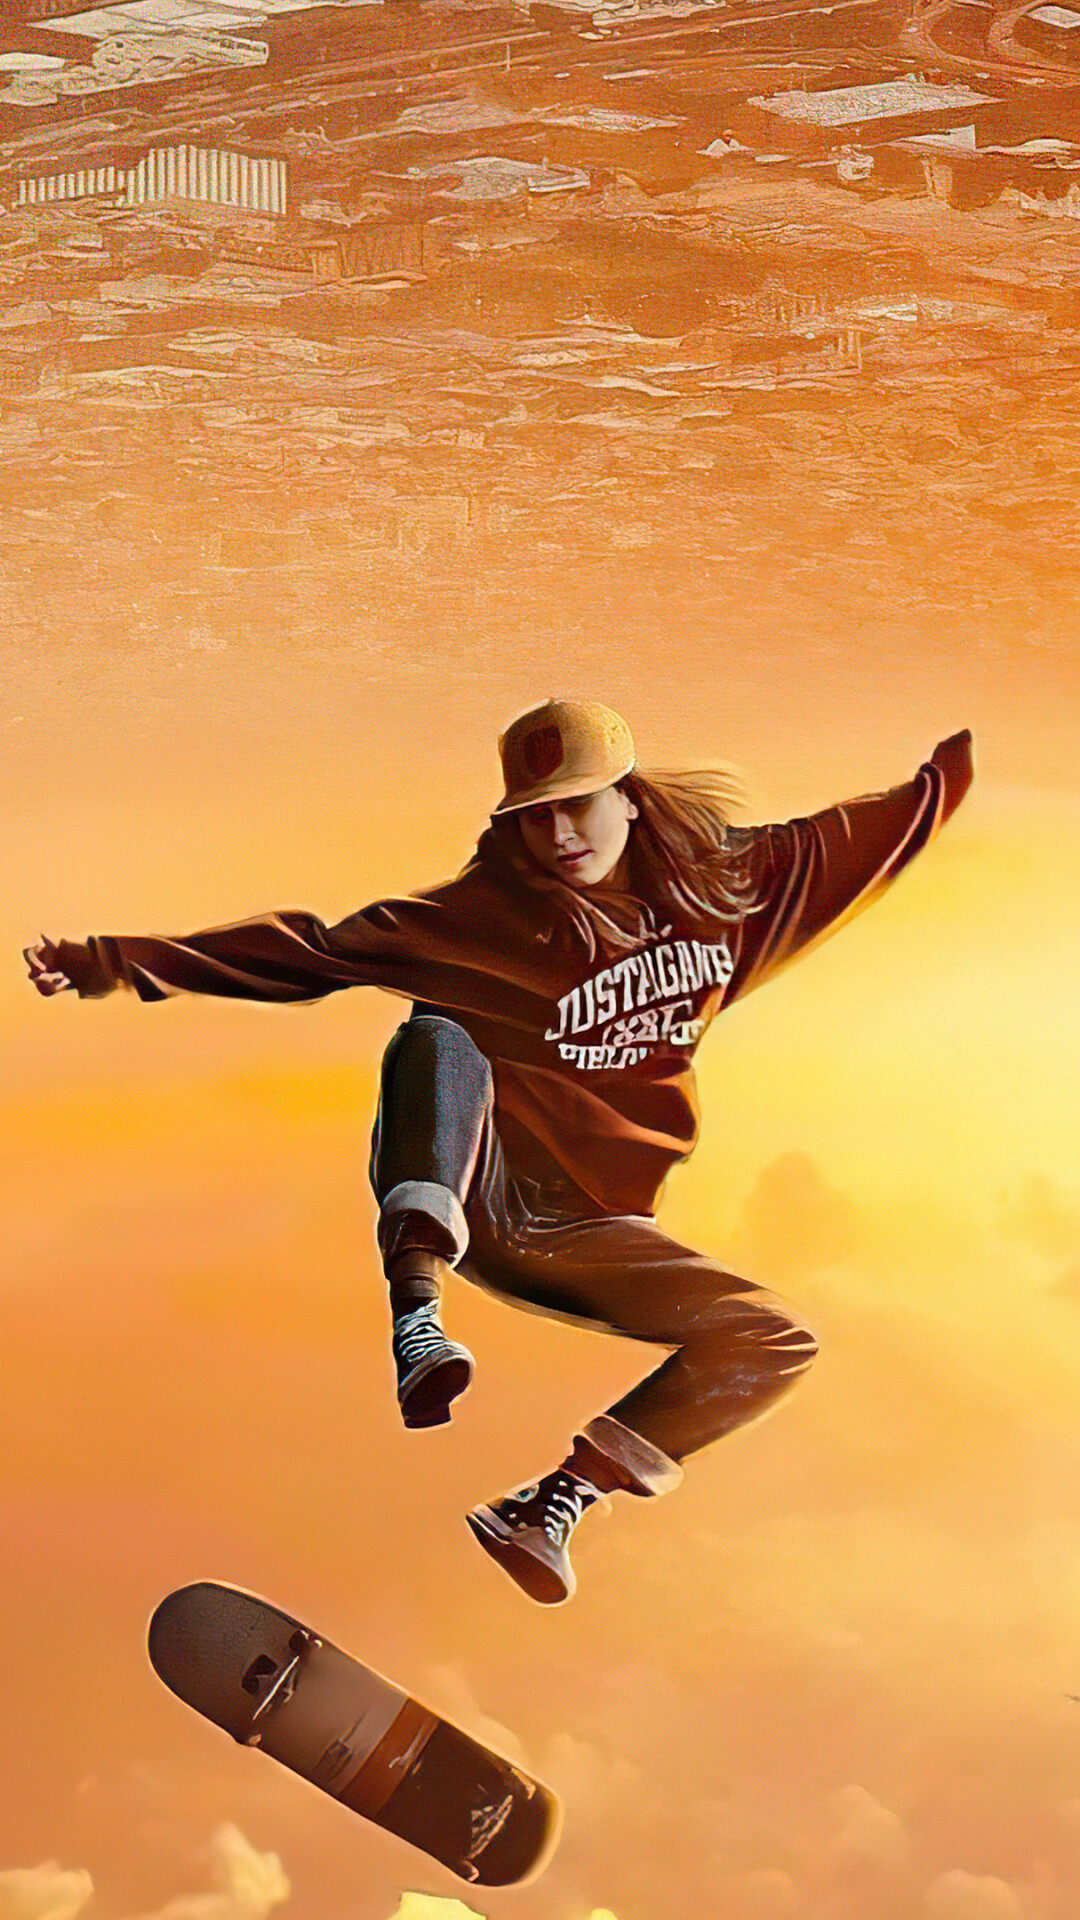 Girl Skateboarding: A skater performing a flip trick, Ollie, High jumping over a bar and landing on the board again. 1080x1920 Full HD Wallpaper.